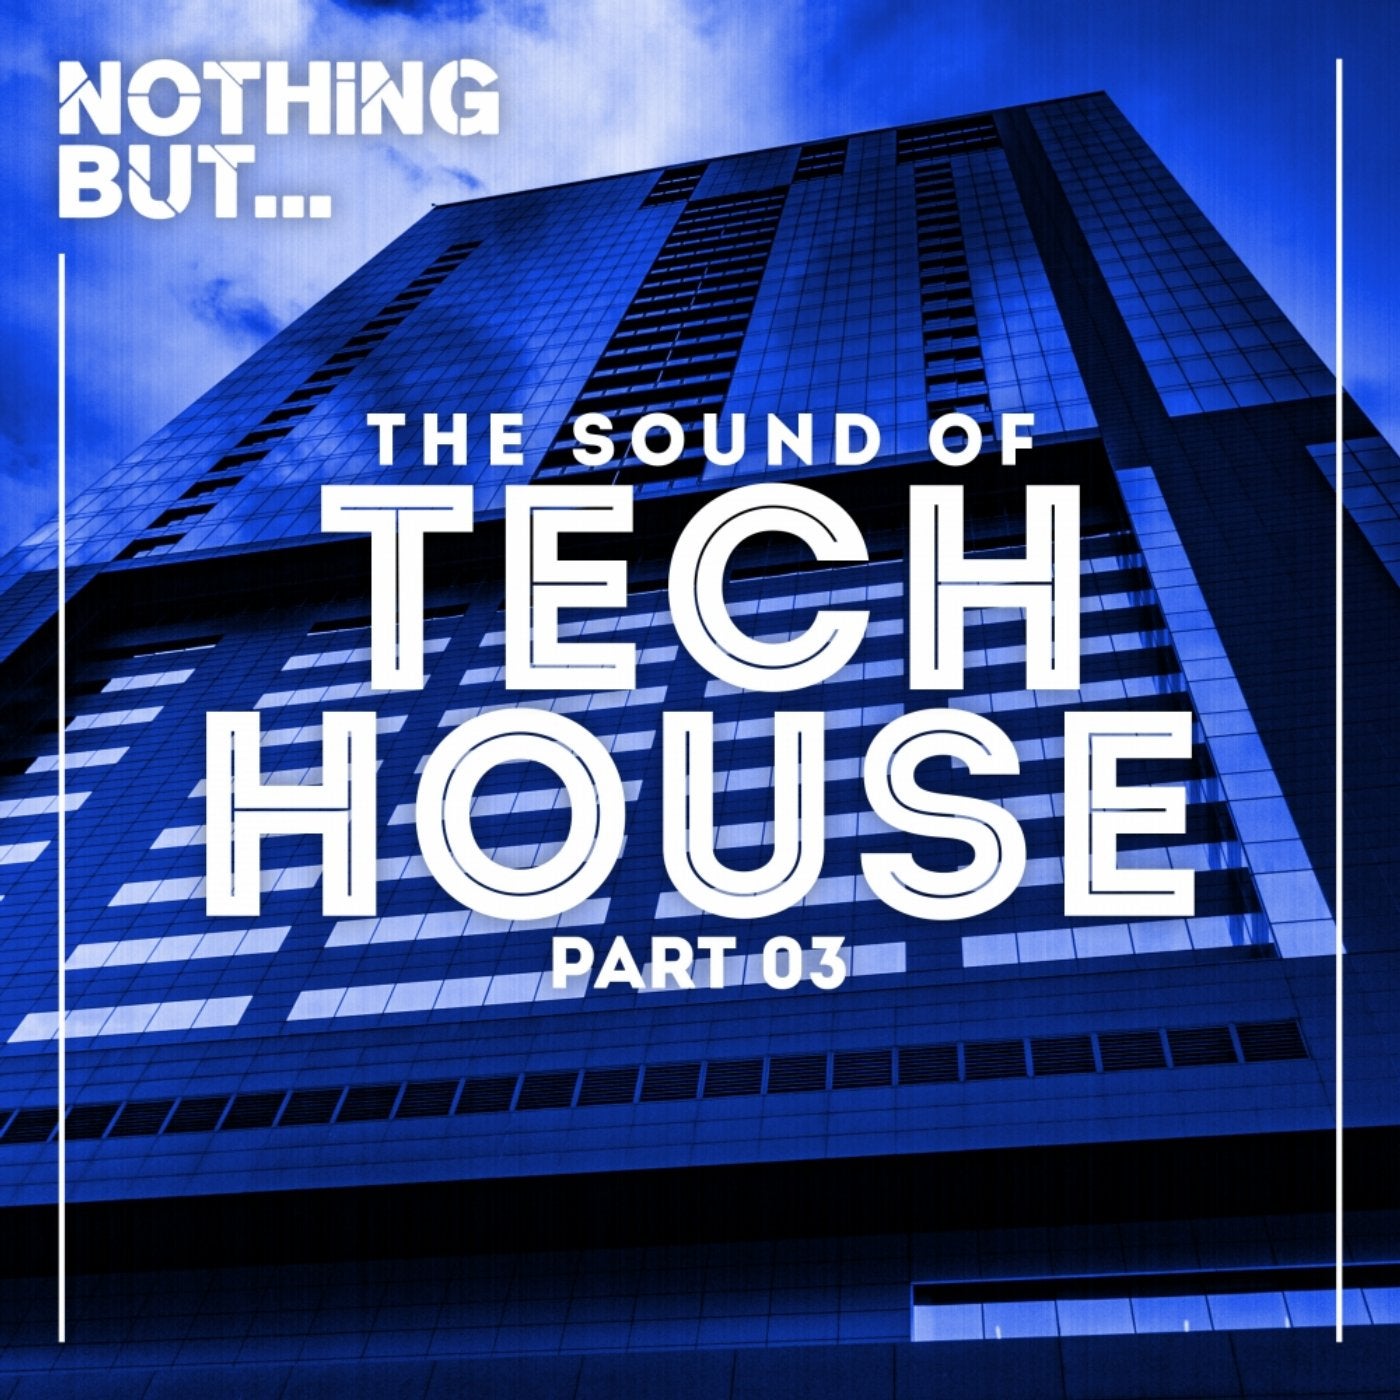 Nothing But... The Sound Of Tech House, Vol. 03